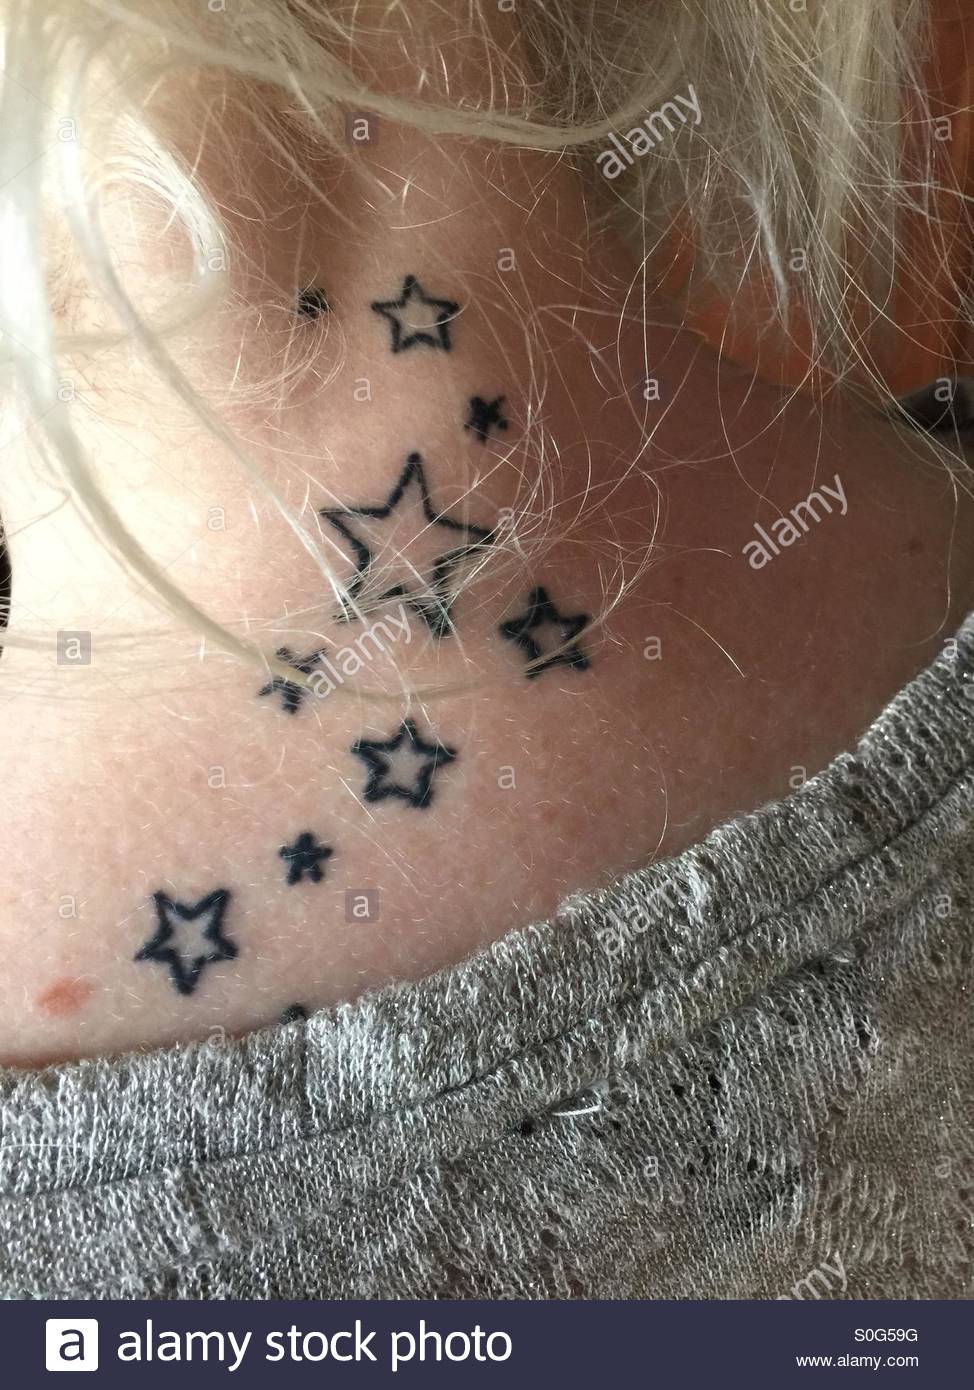 Awesome Outline Star Tattoos On Nape